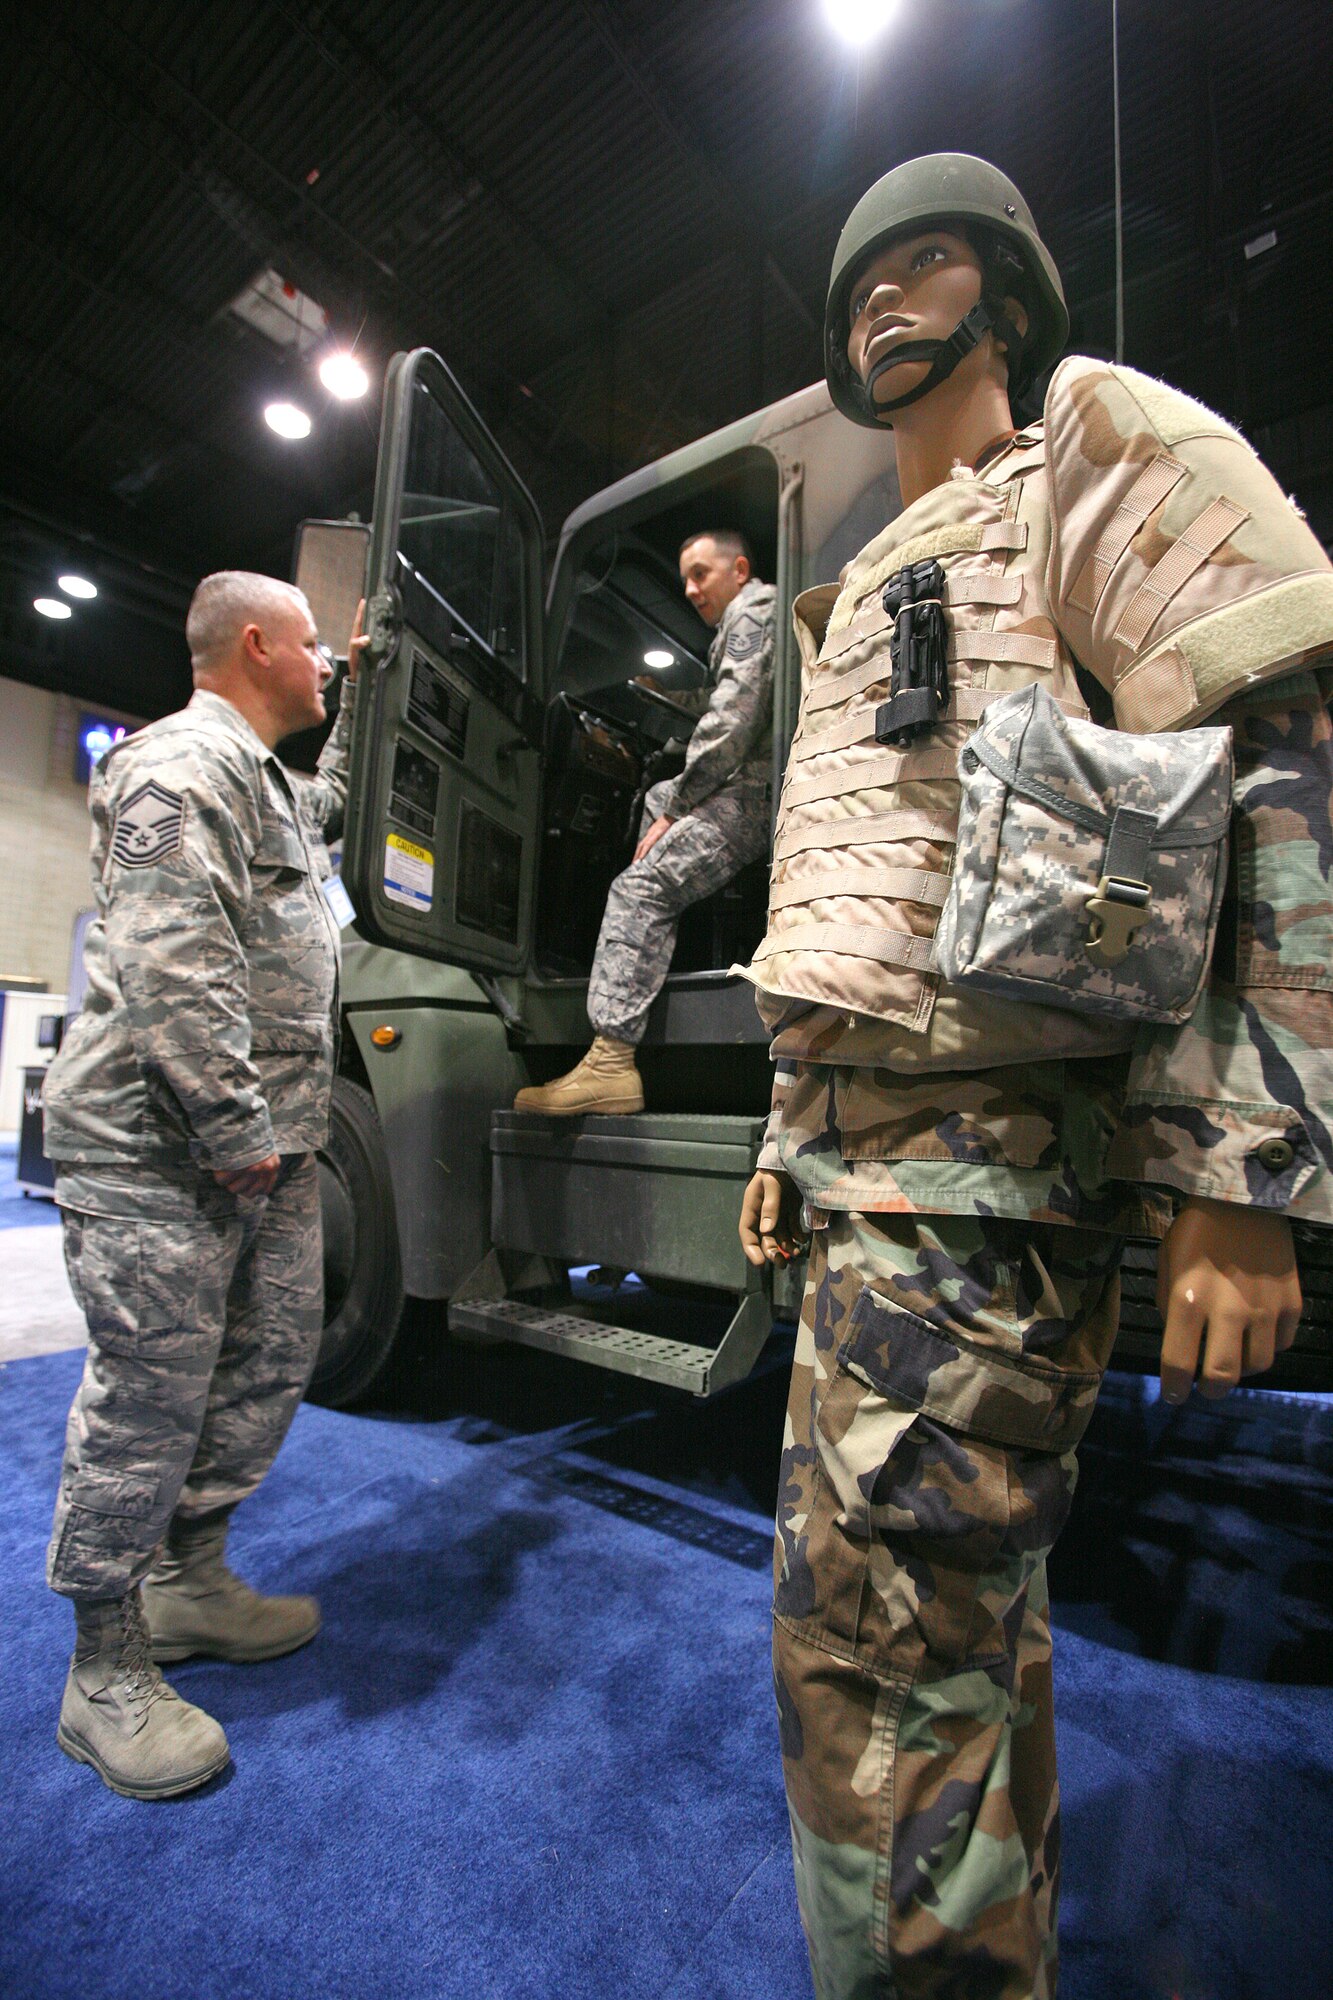 An M915 semi-tractor trailer was part of the 342nd Training Squadron's display at the 2010 Air Education and Training Command symposium Jan. 14 and 15. The display was manned by Senior Master Sgt. Brian Hubbard (standing) and Master Sgt. Chris Dunstone, both with the 342nd TRS. (U.S. Air Force photo/Robbin Cresswell) 